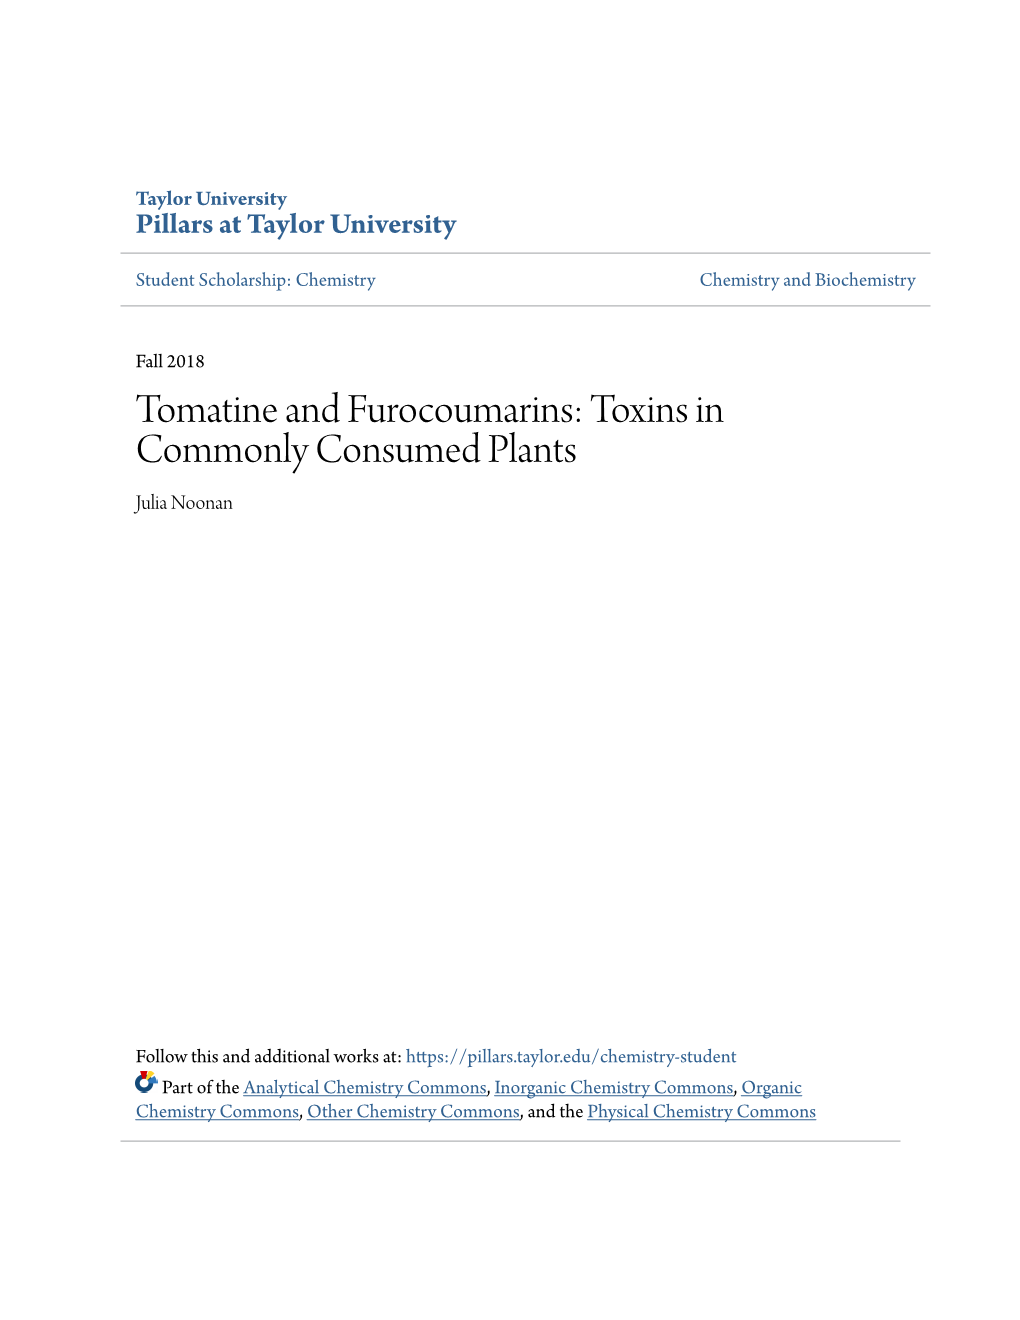 Tomatine and Furocoumarins: Toxins in Commonly Consumed Plants Julia Noonan